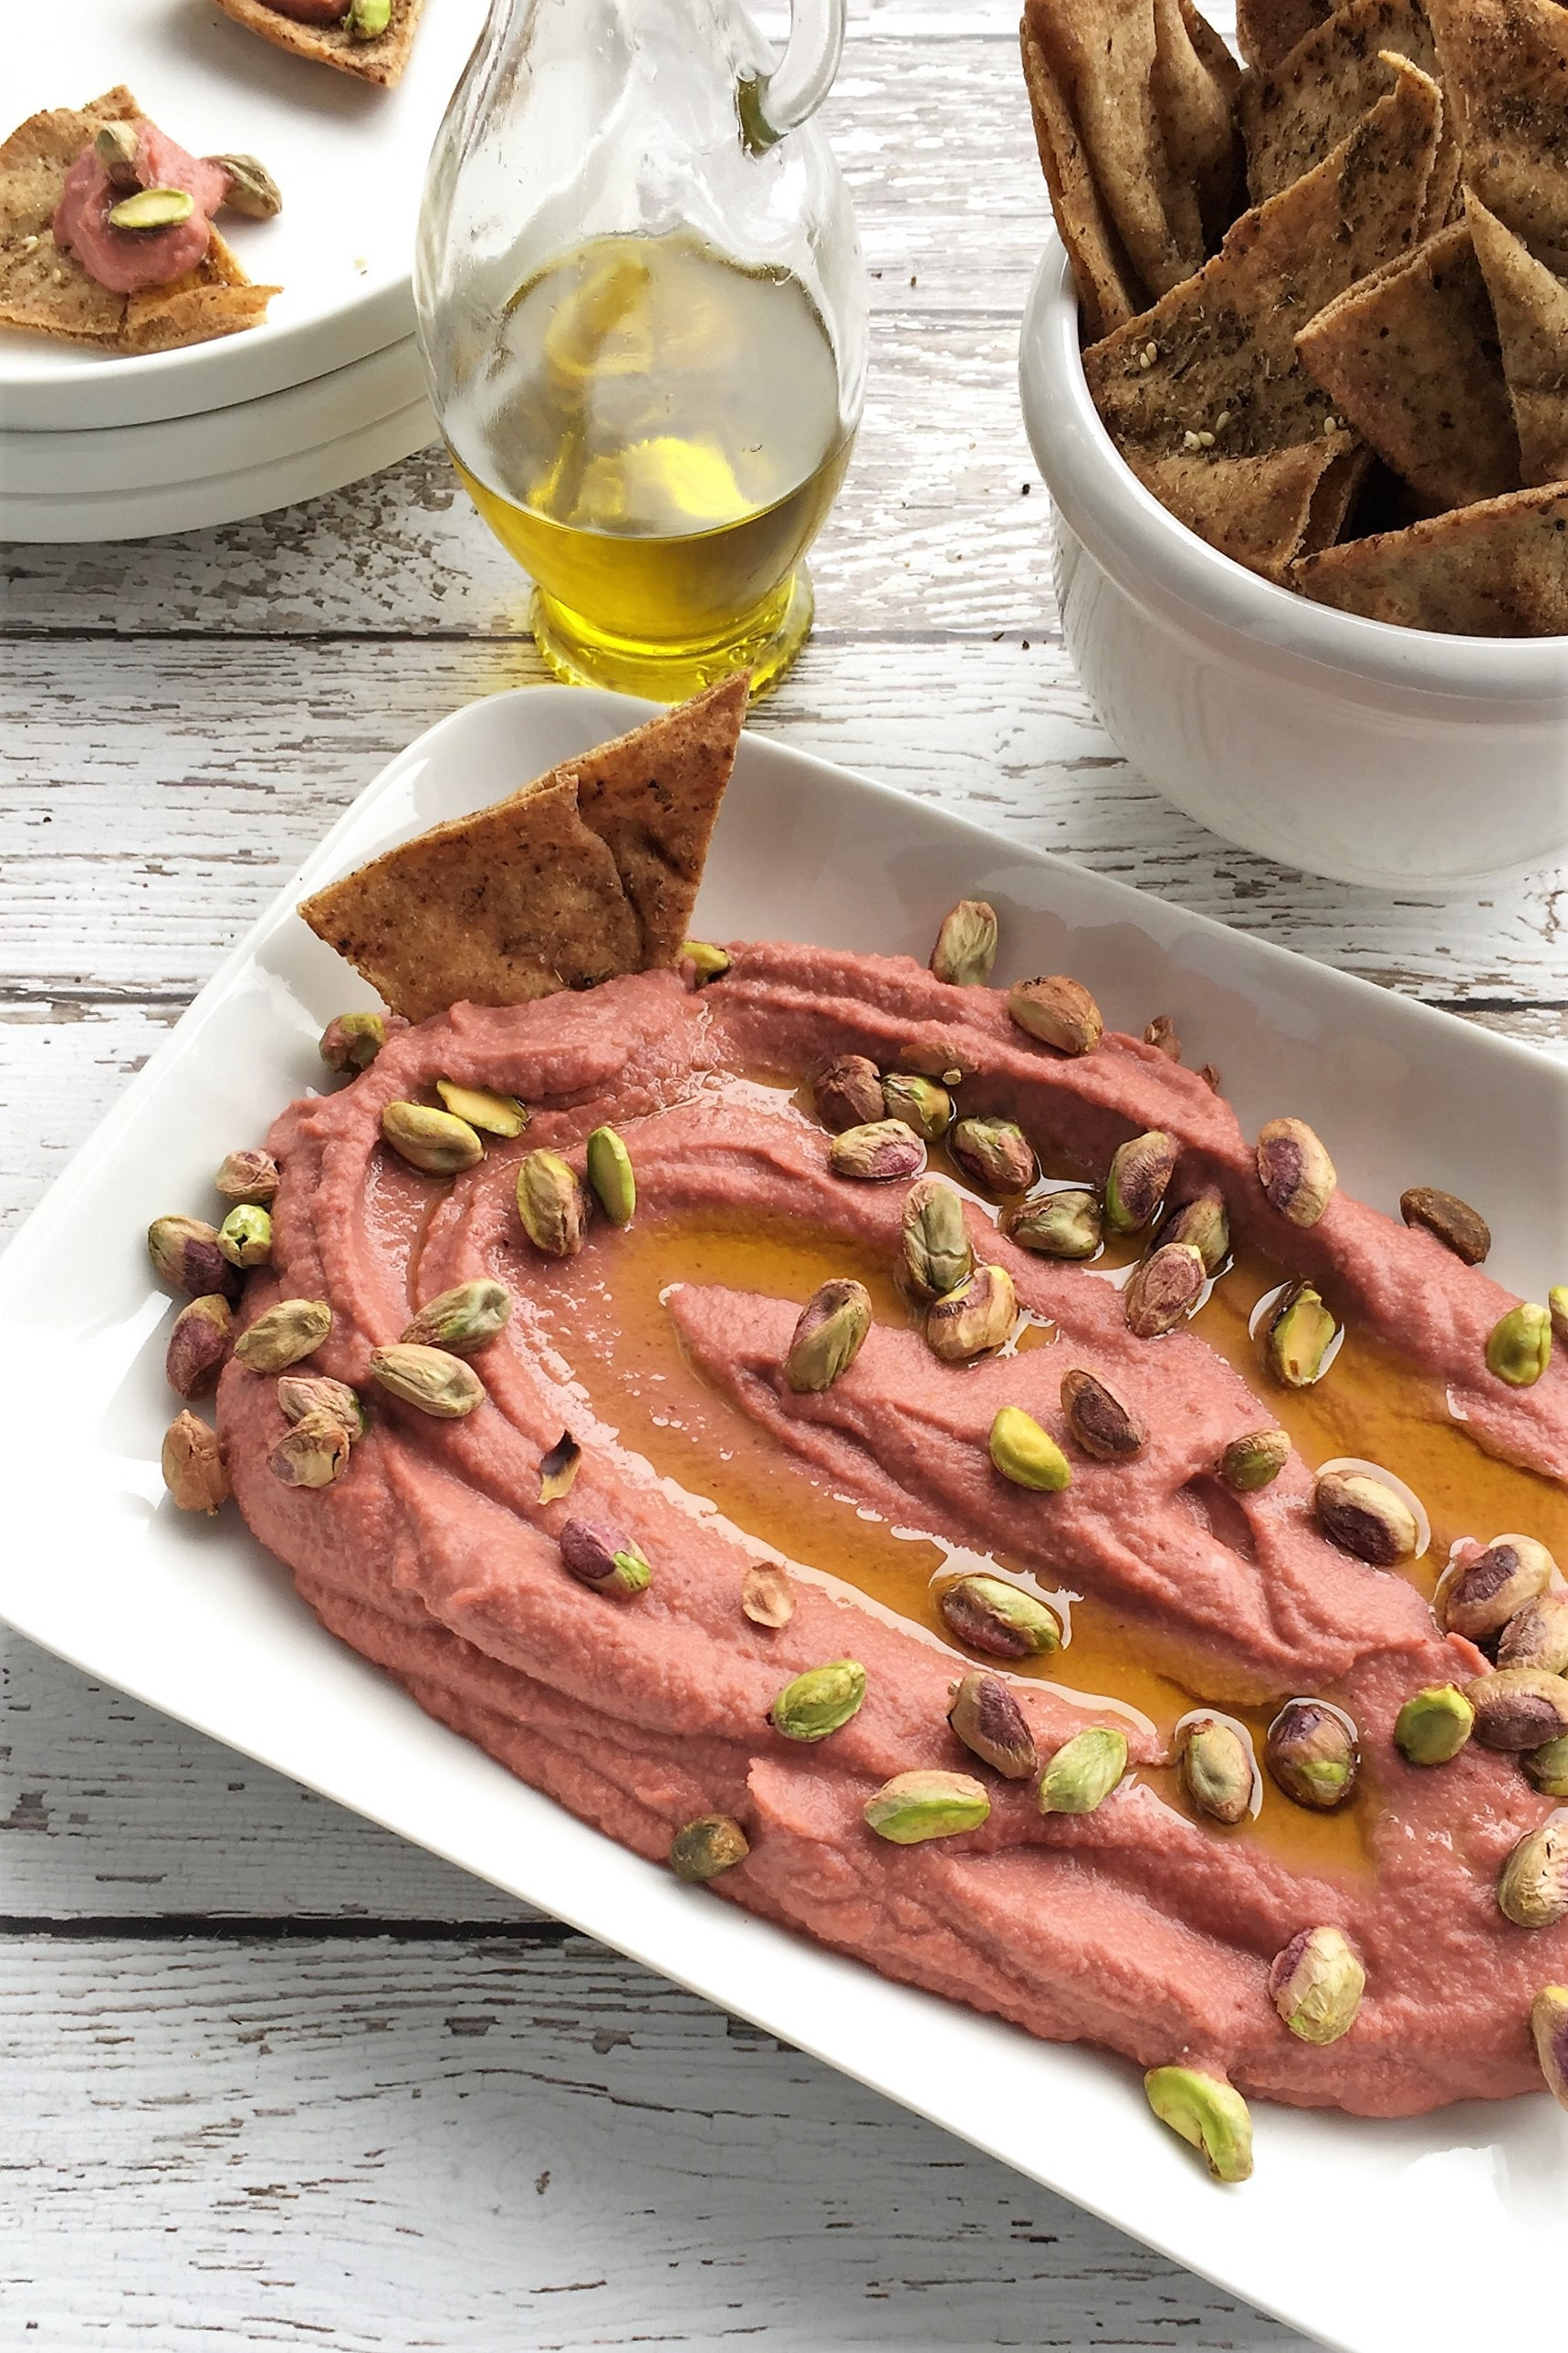 Links to Lemony Beet Hummus with Poached Wonderful Pistachios recipe